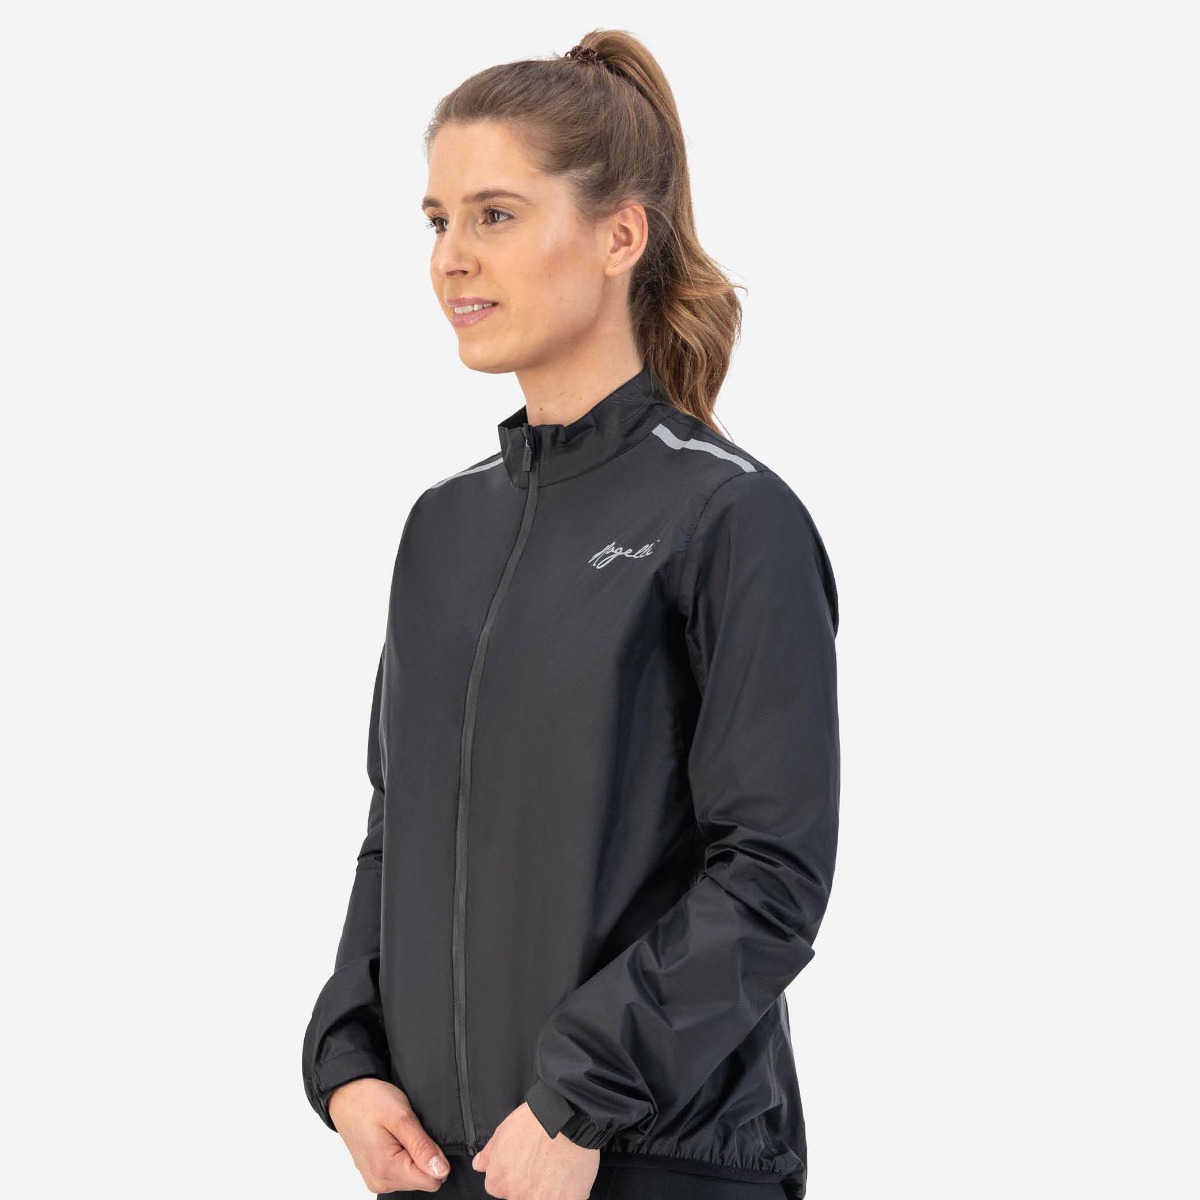 Female cyclist is wearing the Rogelli Core rain jacket for protection against rain